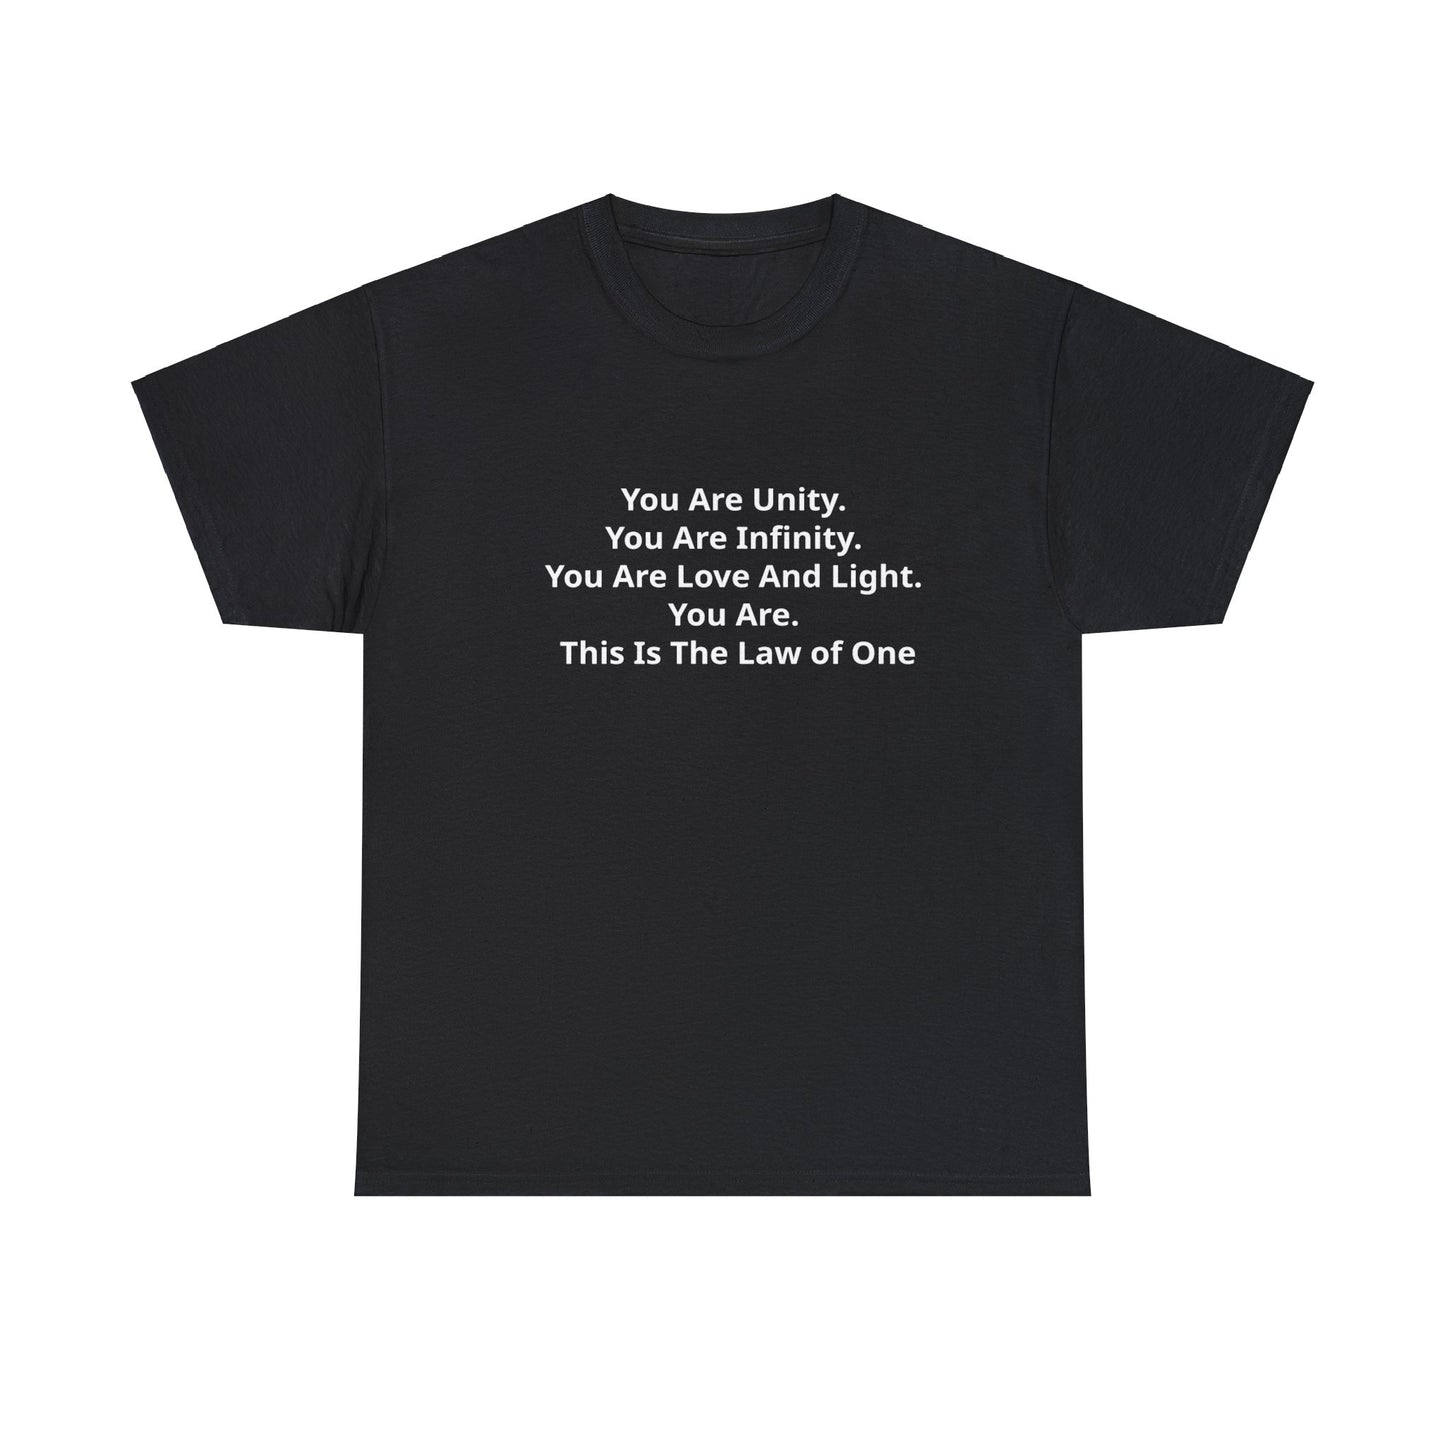 You Are Unity. You Are Infinity. You Are Love And Light. You Are. This Is The Law of One Cotton T-Shirt